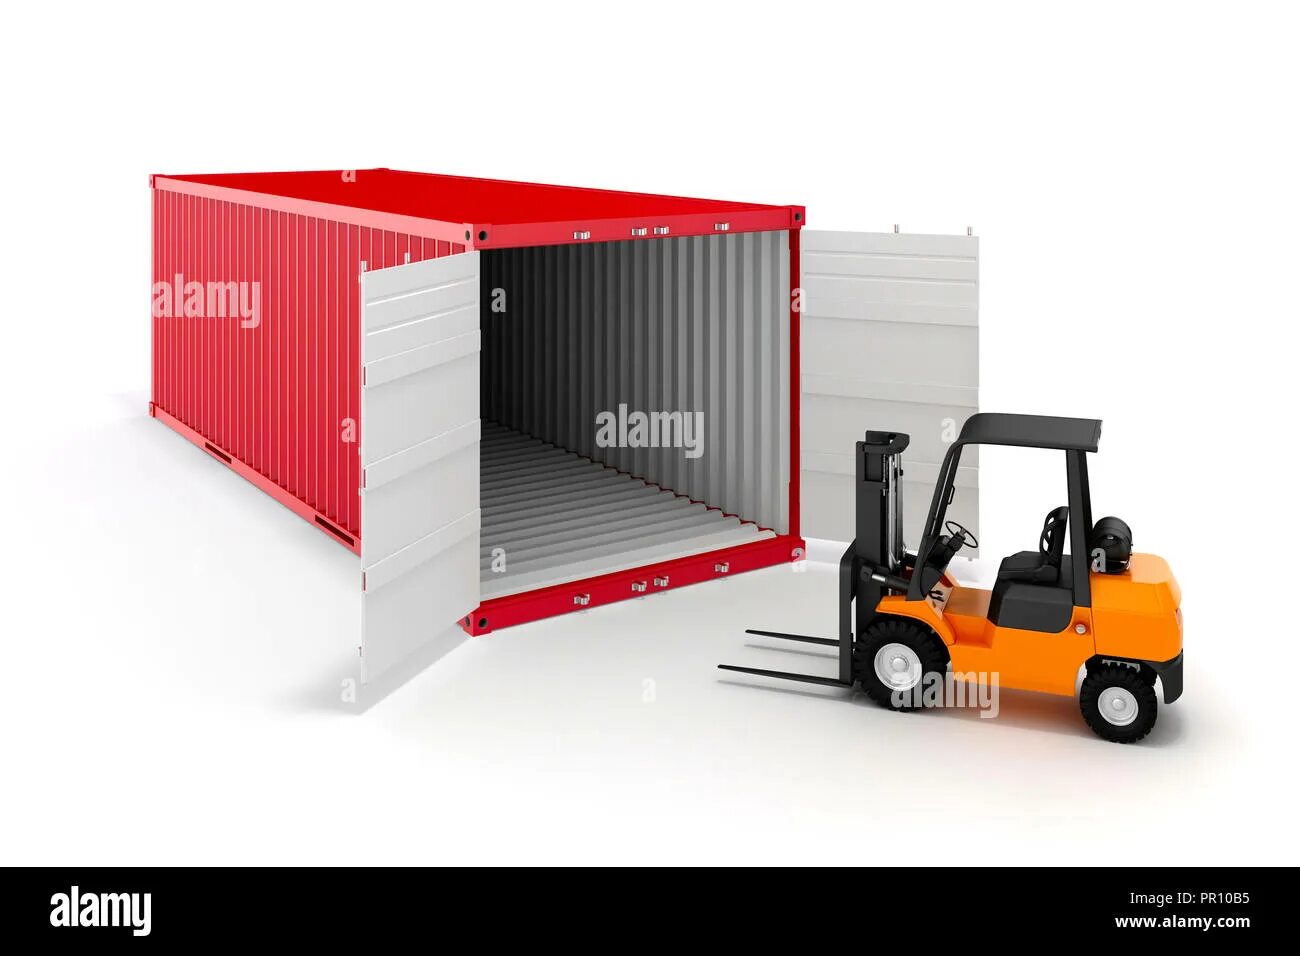 Truck with Container. Hot shot Truck with Container. Cargo Box background.